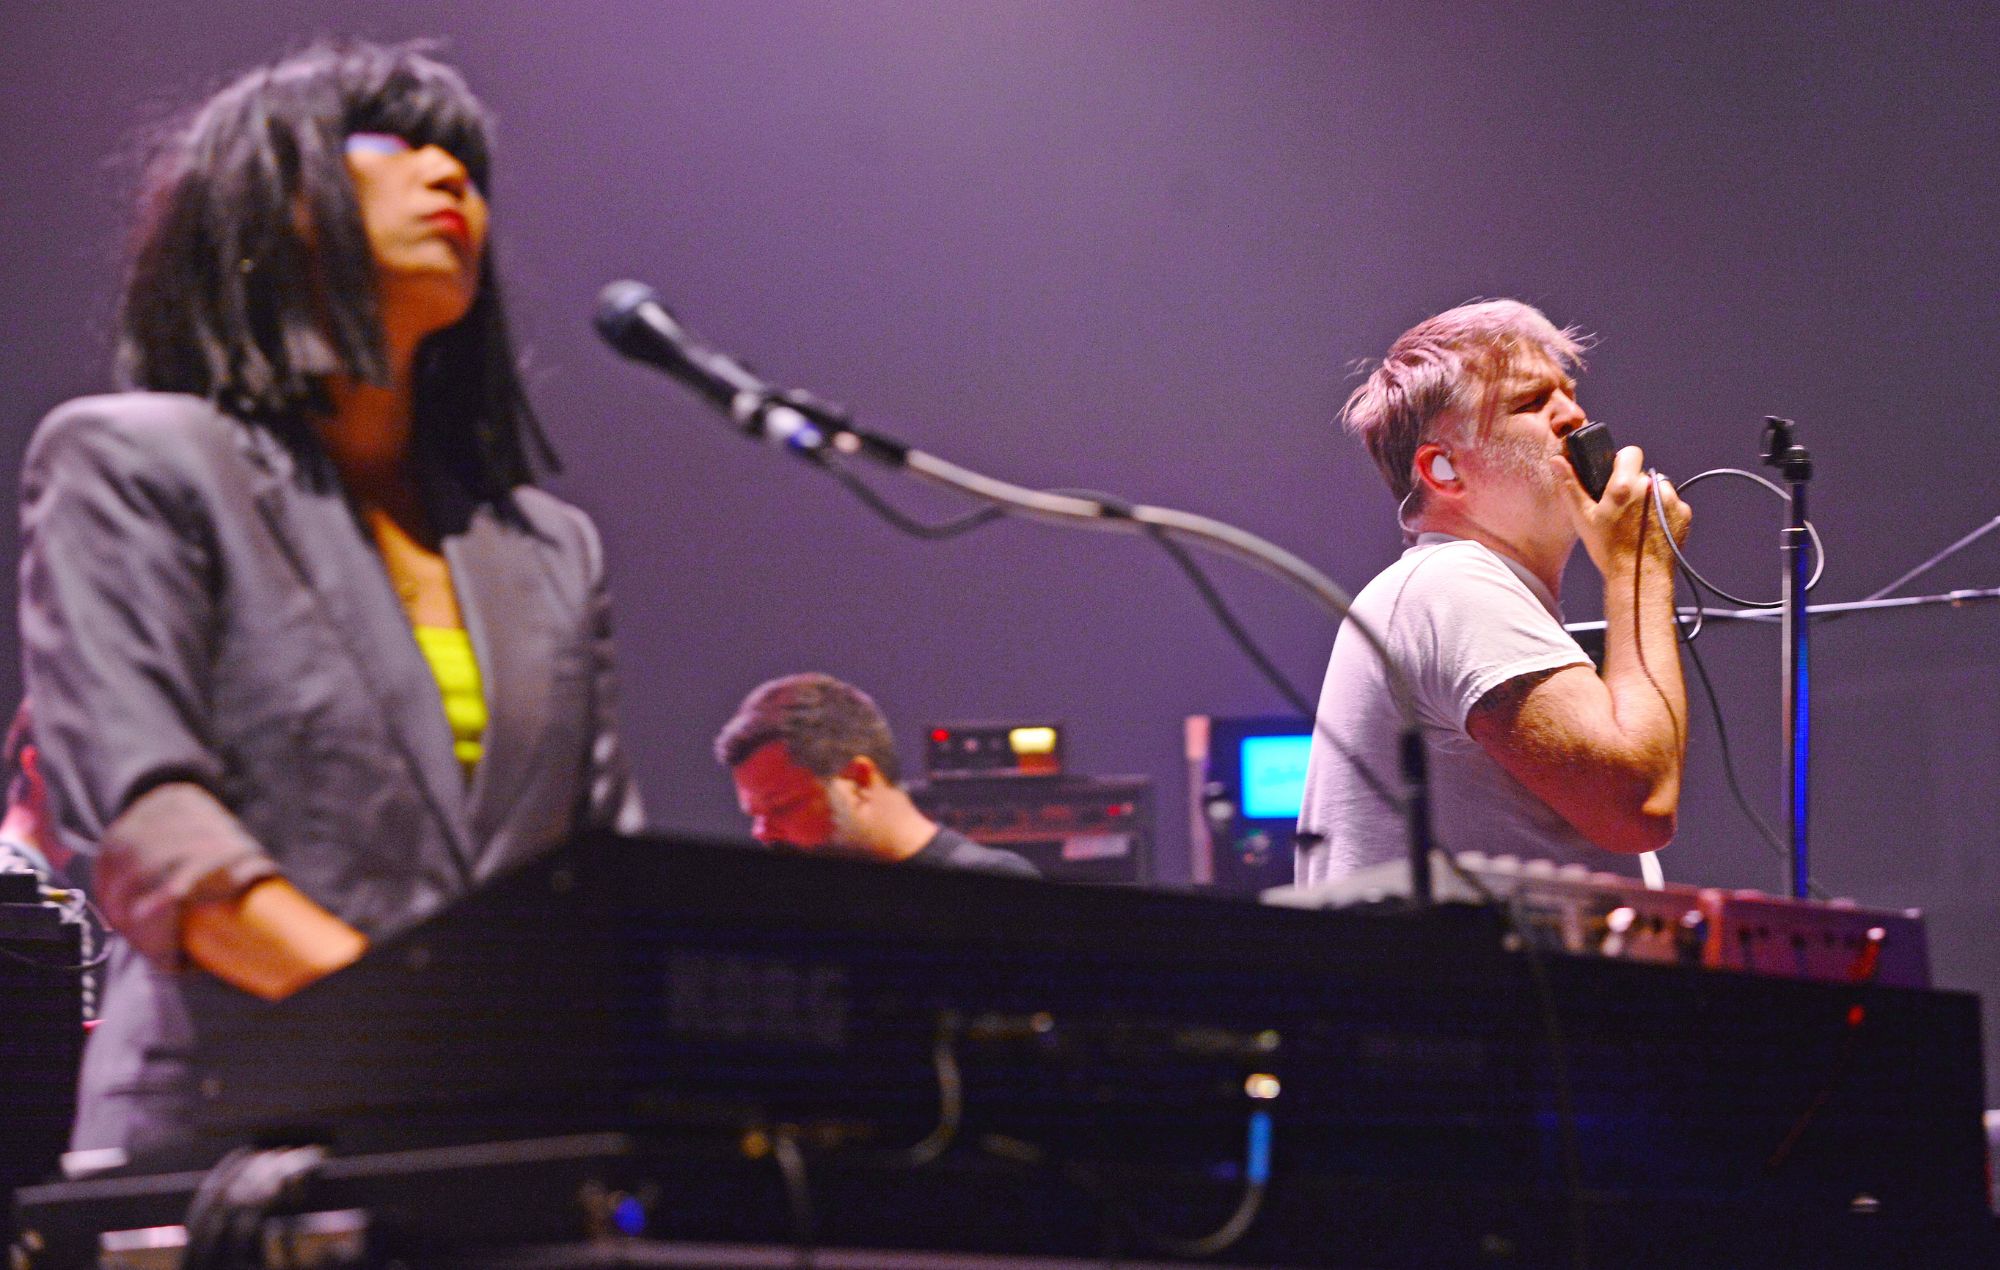 James Murphy and Nancy Whang of LCD Soundsystem perform live